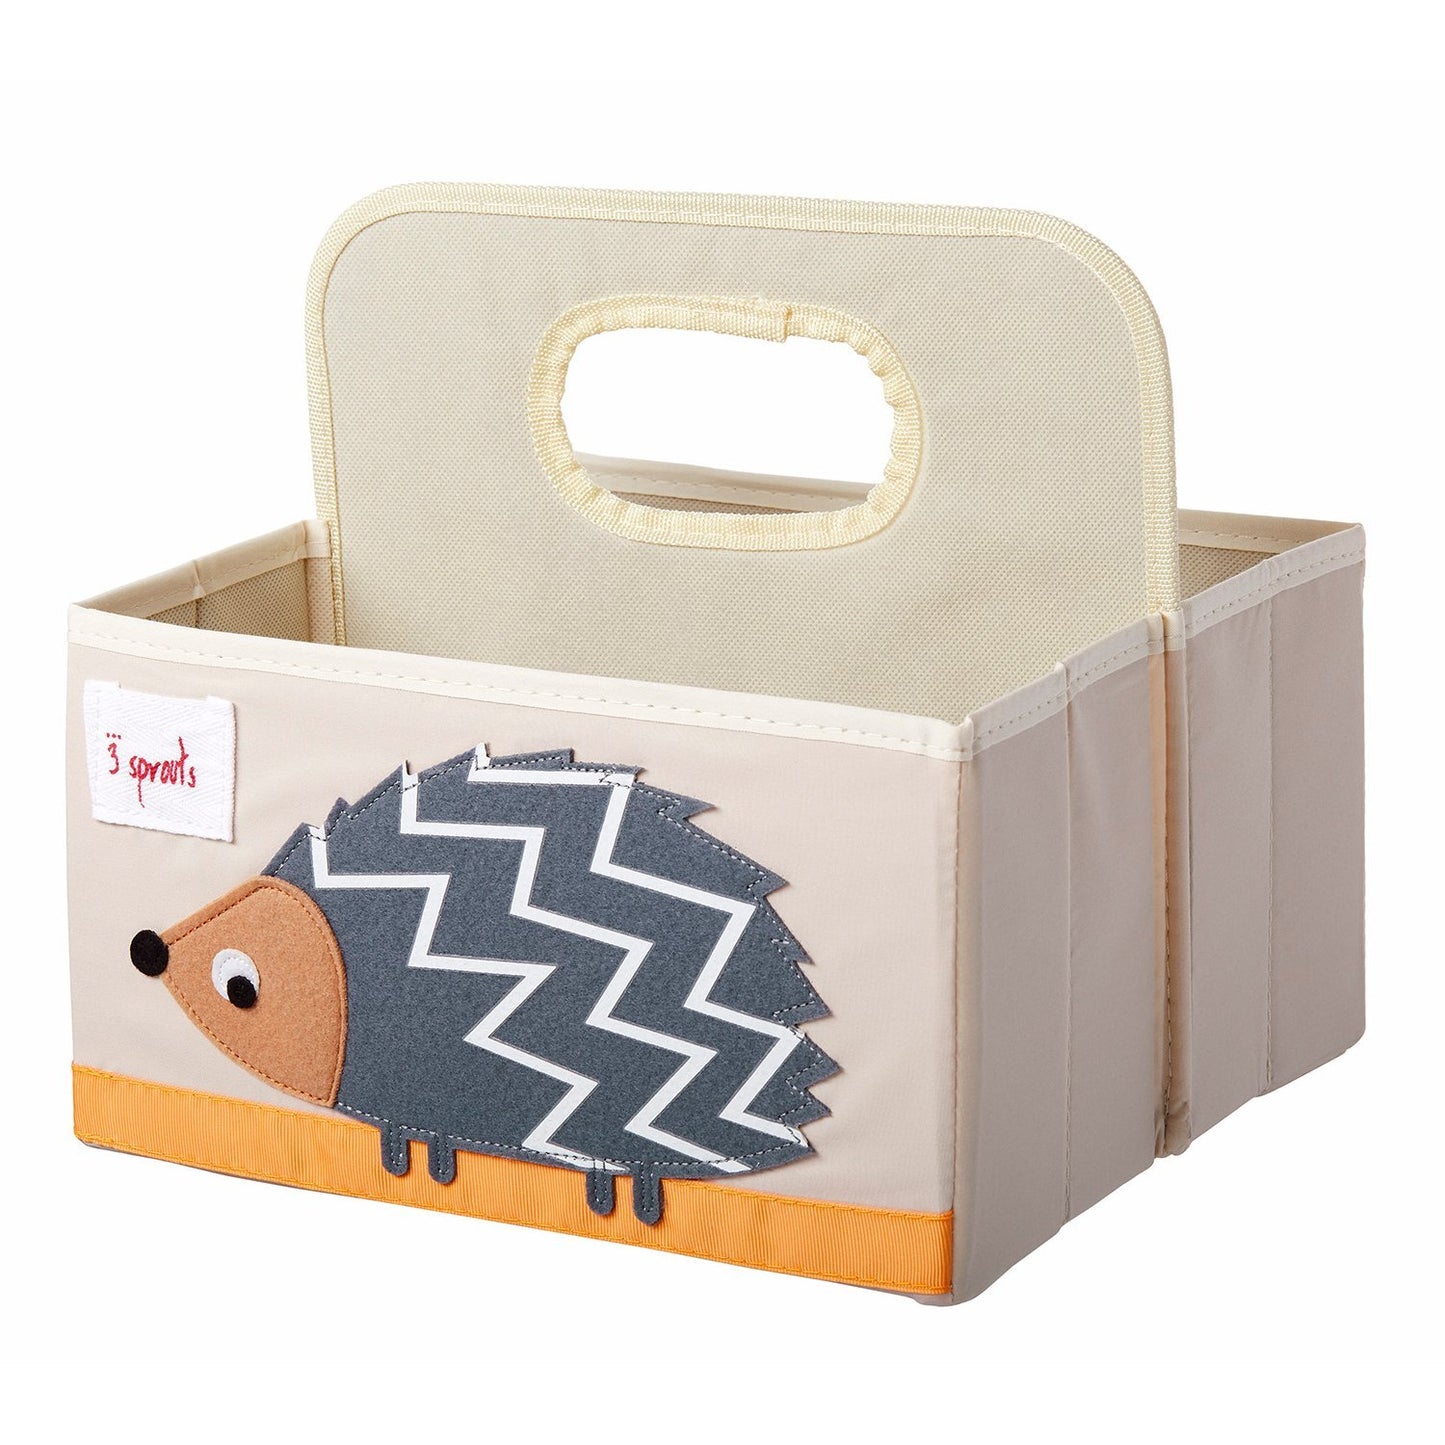 hedgehog diaper caddy - 3 Sprouts